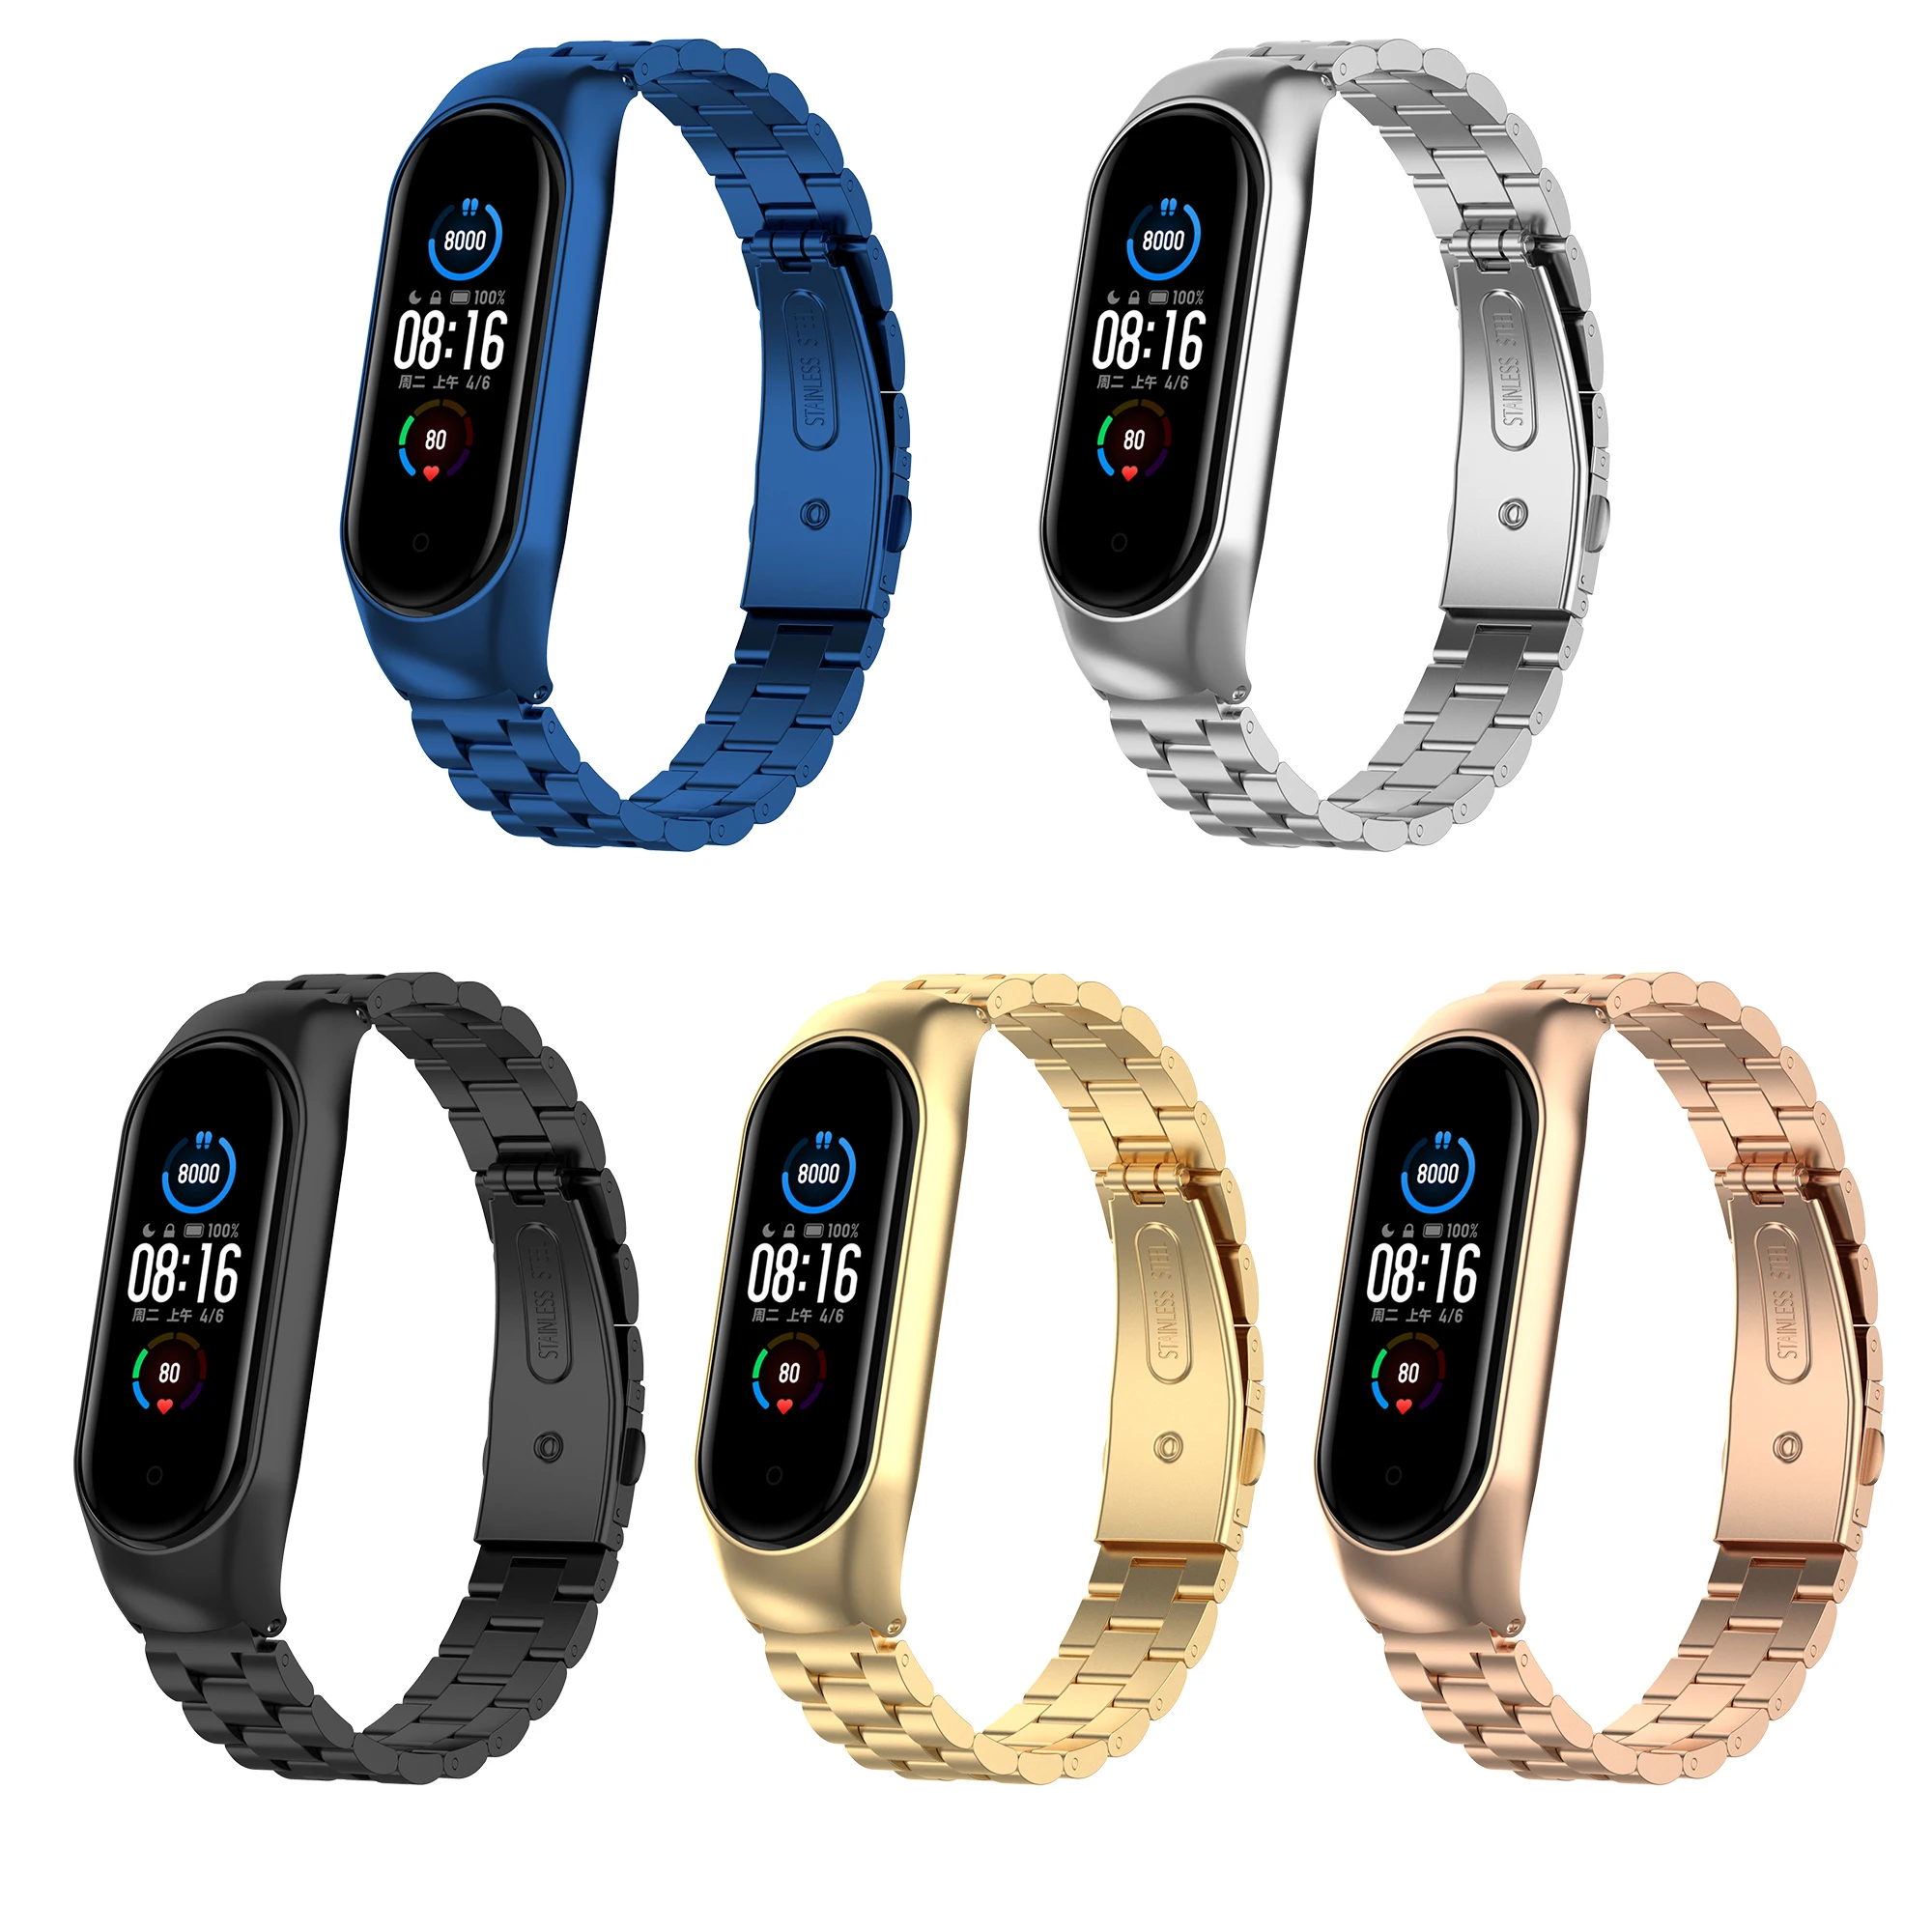 

Tschick for Xiaomi Mi Band 5 6 Strap Metal Wristbands Stainless Steel Bracelet for Mi band 5 6 Strap Correa Miband 5 Wrist Bands, Multi-color optional or customized